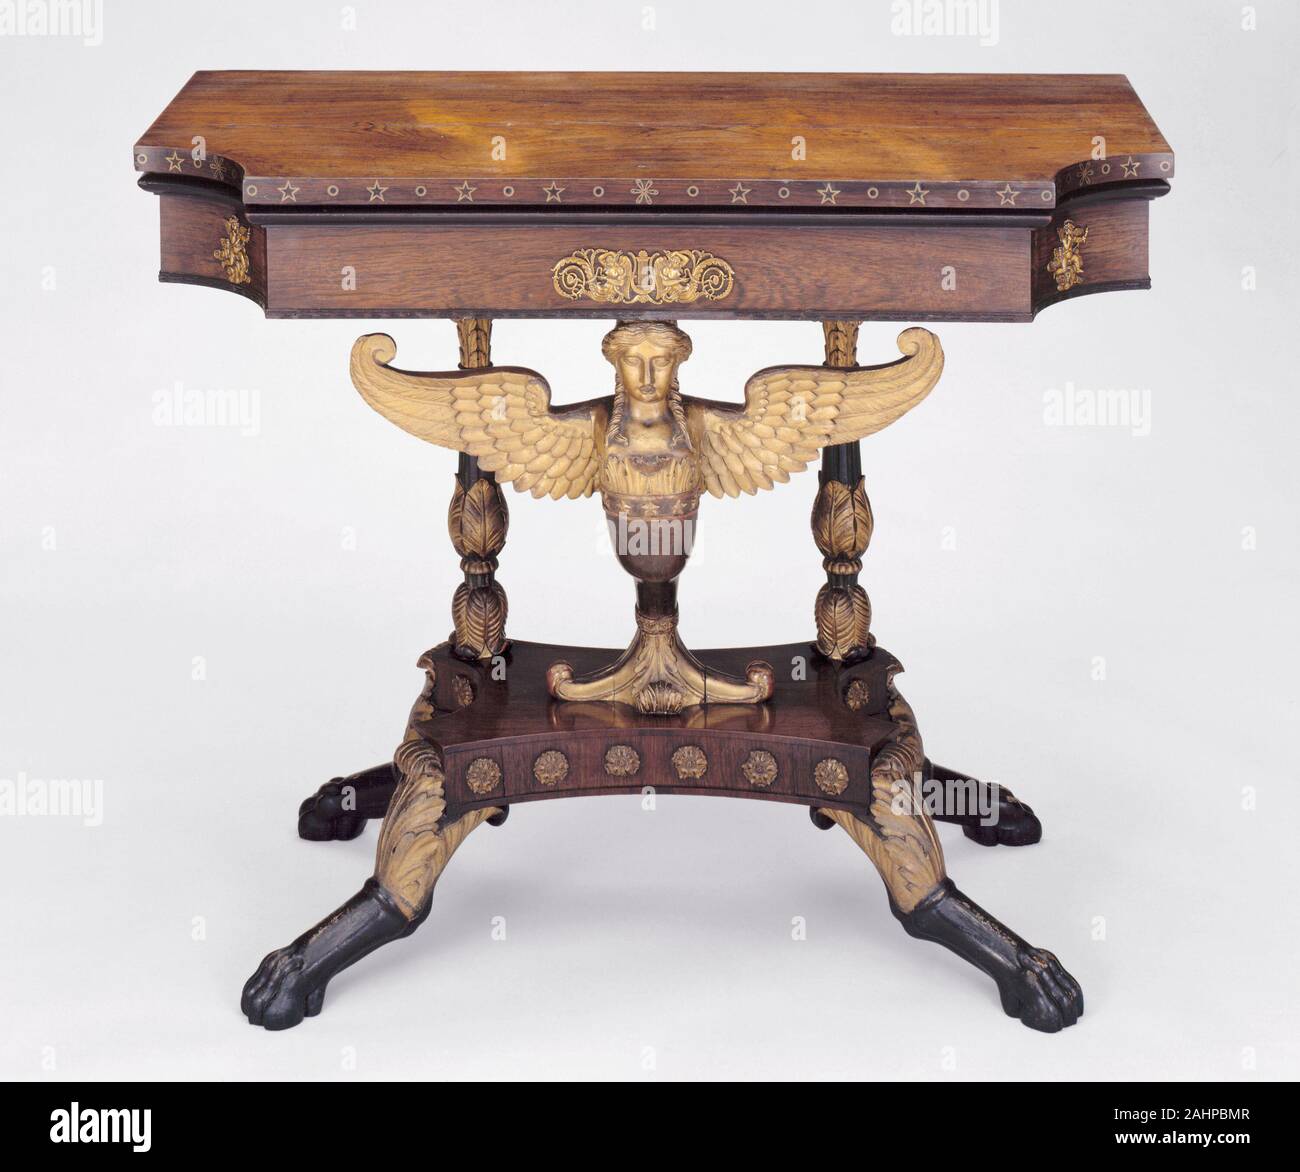 Charles-Honoré Lannuier. Card Table. 1815. New York. Mahogany with rosewood veneer, giltwood, brass and ebony inlay, ormolu Trained as a cabinet-maker in Paris, Charles-Honoré Lannuier arrived in New York in 1803 at the age of twenty-four. His older brother was already well established as the owner of a successful confectionary shop on Broadway and from there the young furniture maker first advertised his services to all potential clients who desired furniture in the “latest French fashion.” Early-nineteenth-century America was much enamored with French taste, and Lannuier successfully catered Stock Photo